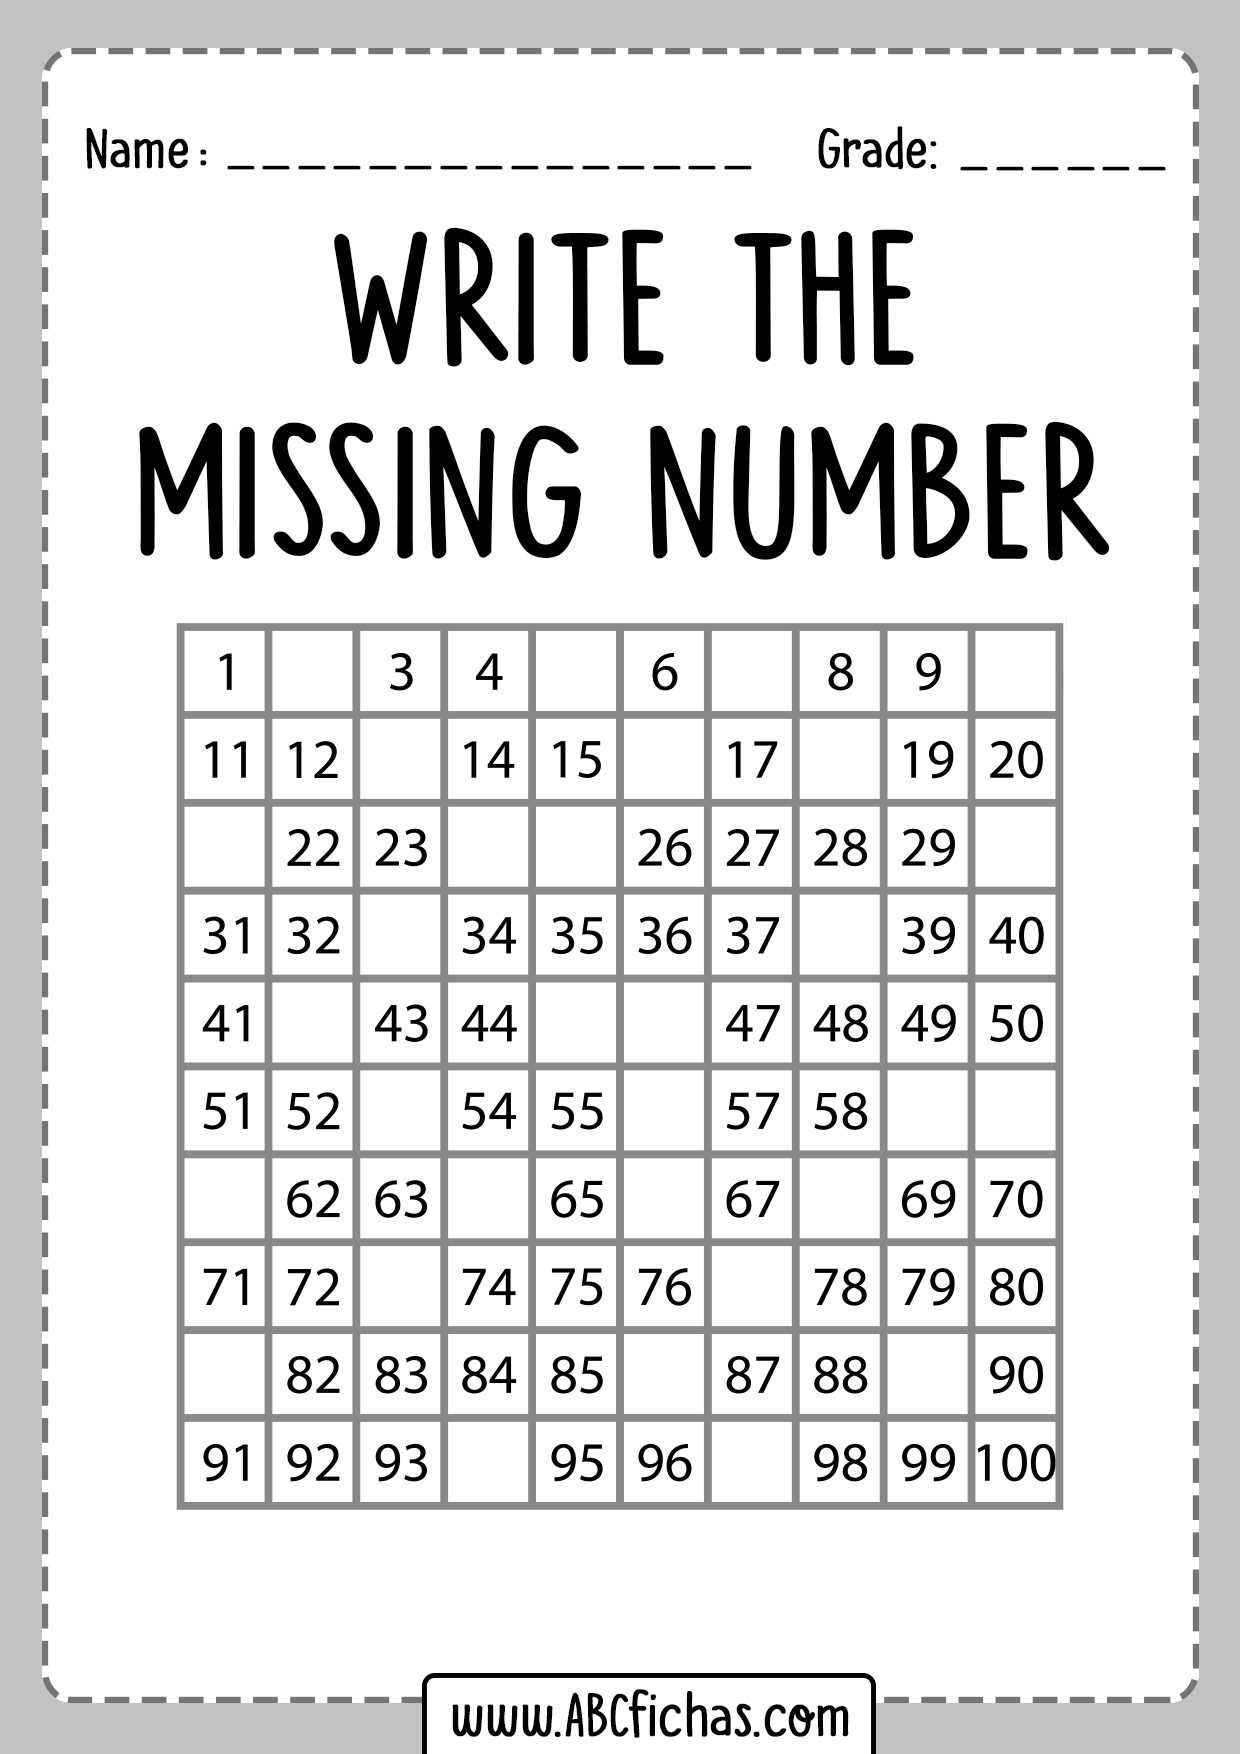 Write The Missing Number Worksheet ABC Fichas